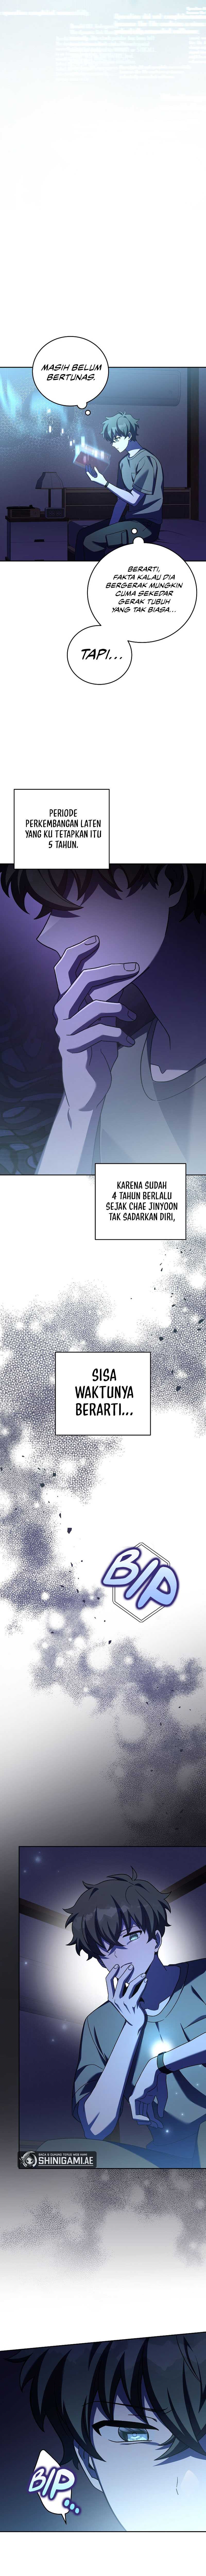 The Novel’s Extra (remake) Chapter 99